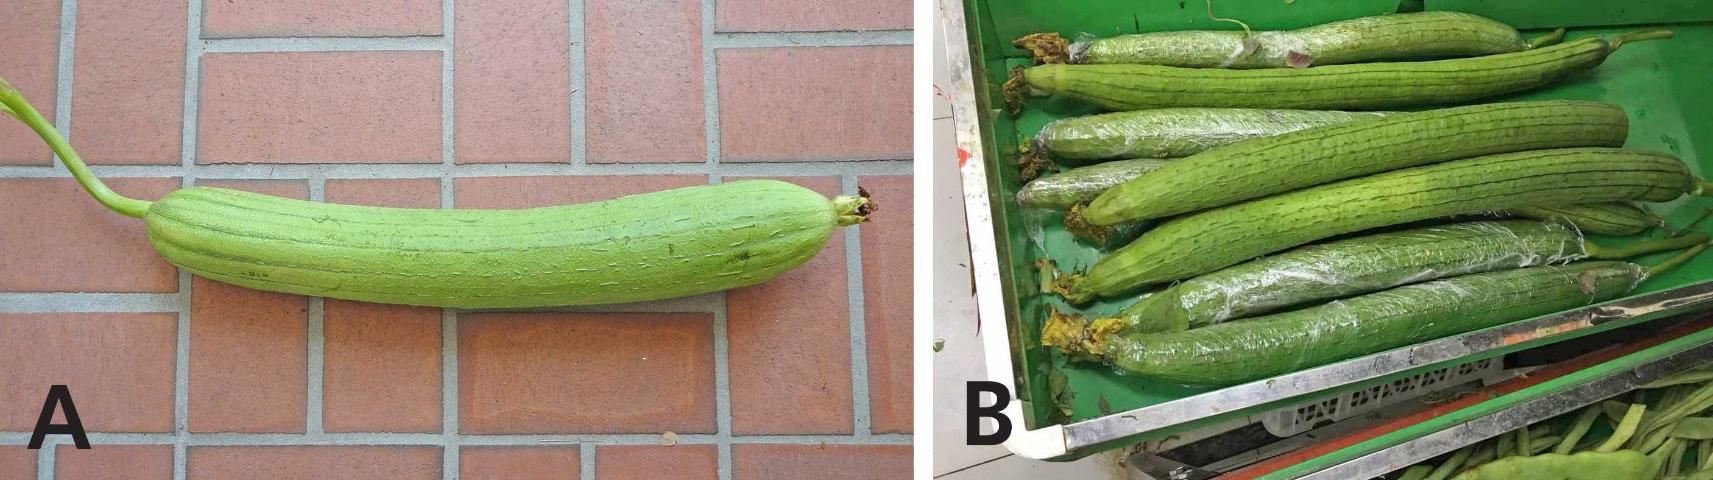 Figure 1. (a) Fresh immature fruit of smooth luffa. (b) The fruit are sometimes wrapped with cling wrap to maintain moisture after harvest.